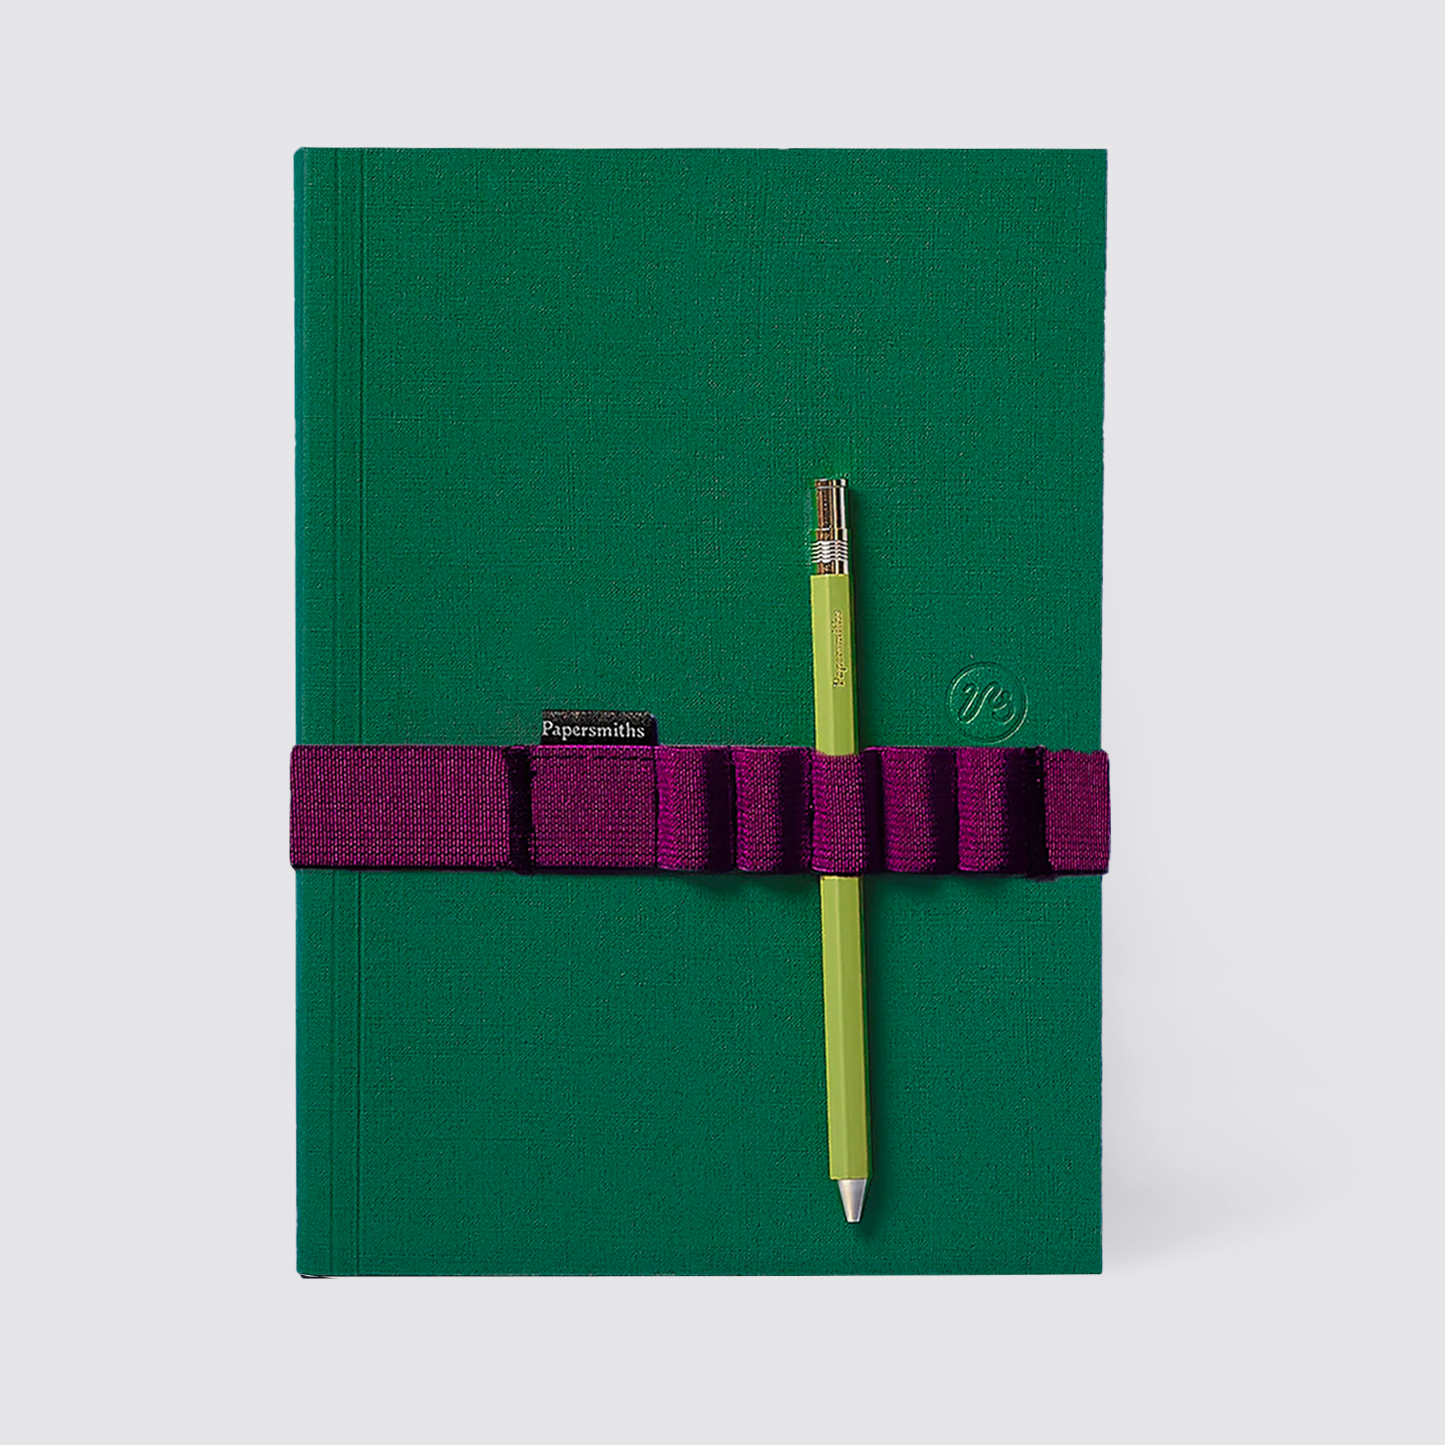 Clissold Notebook, Pen and Band Trio - Everyday Pen / Ruled Paper